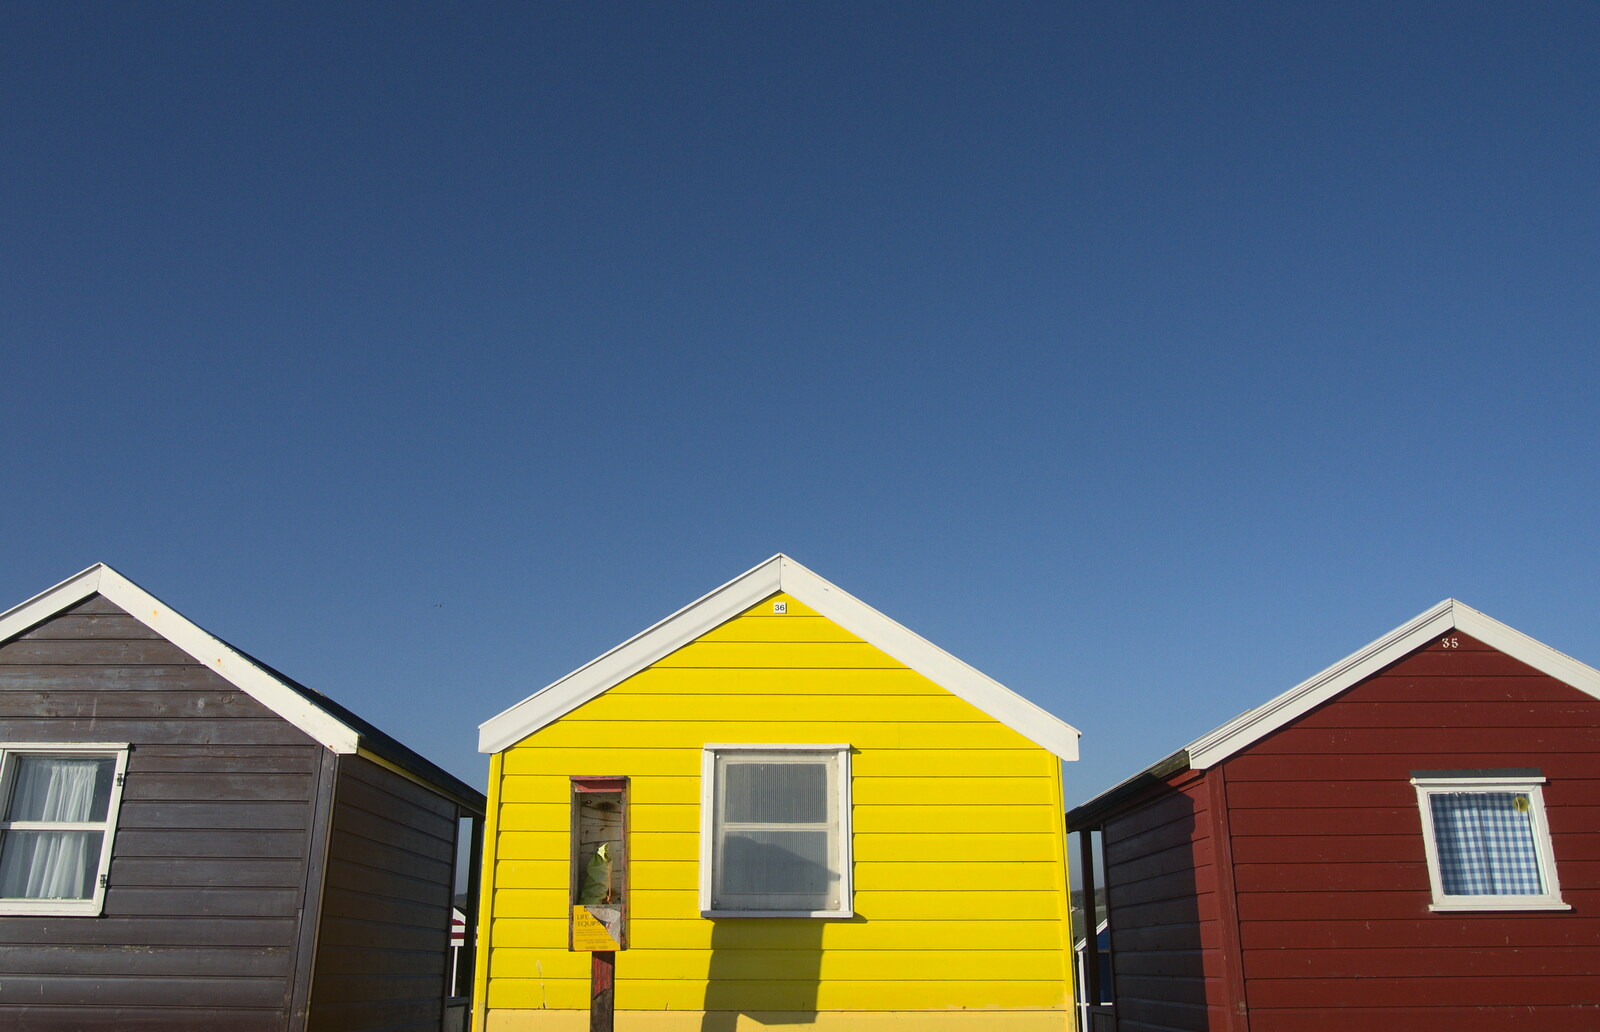 Bright-coloured beach huts on Southwold beach front from A Busy Day, Southwold and Thornham, Suffolk - 11th November 2012